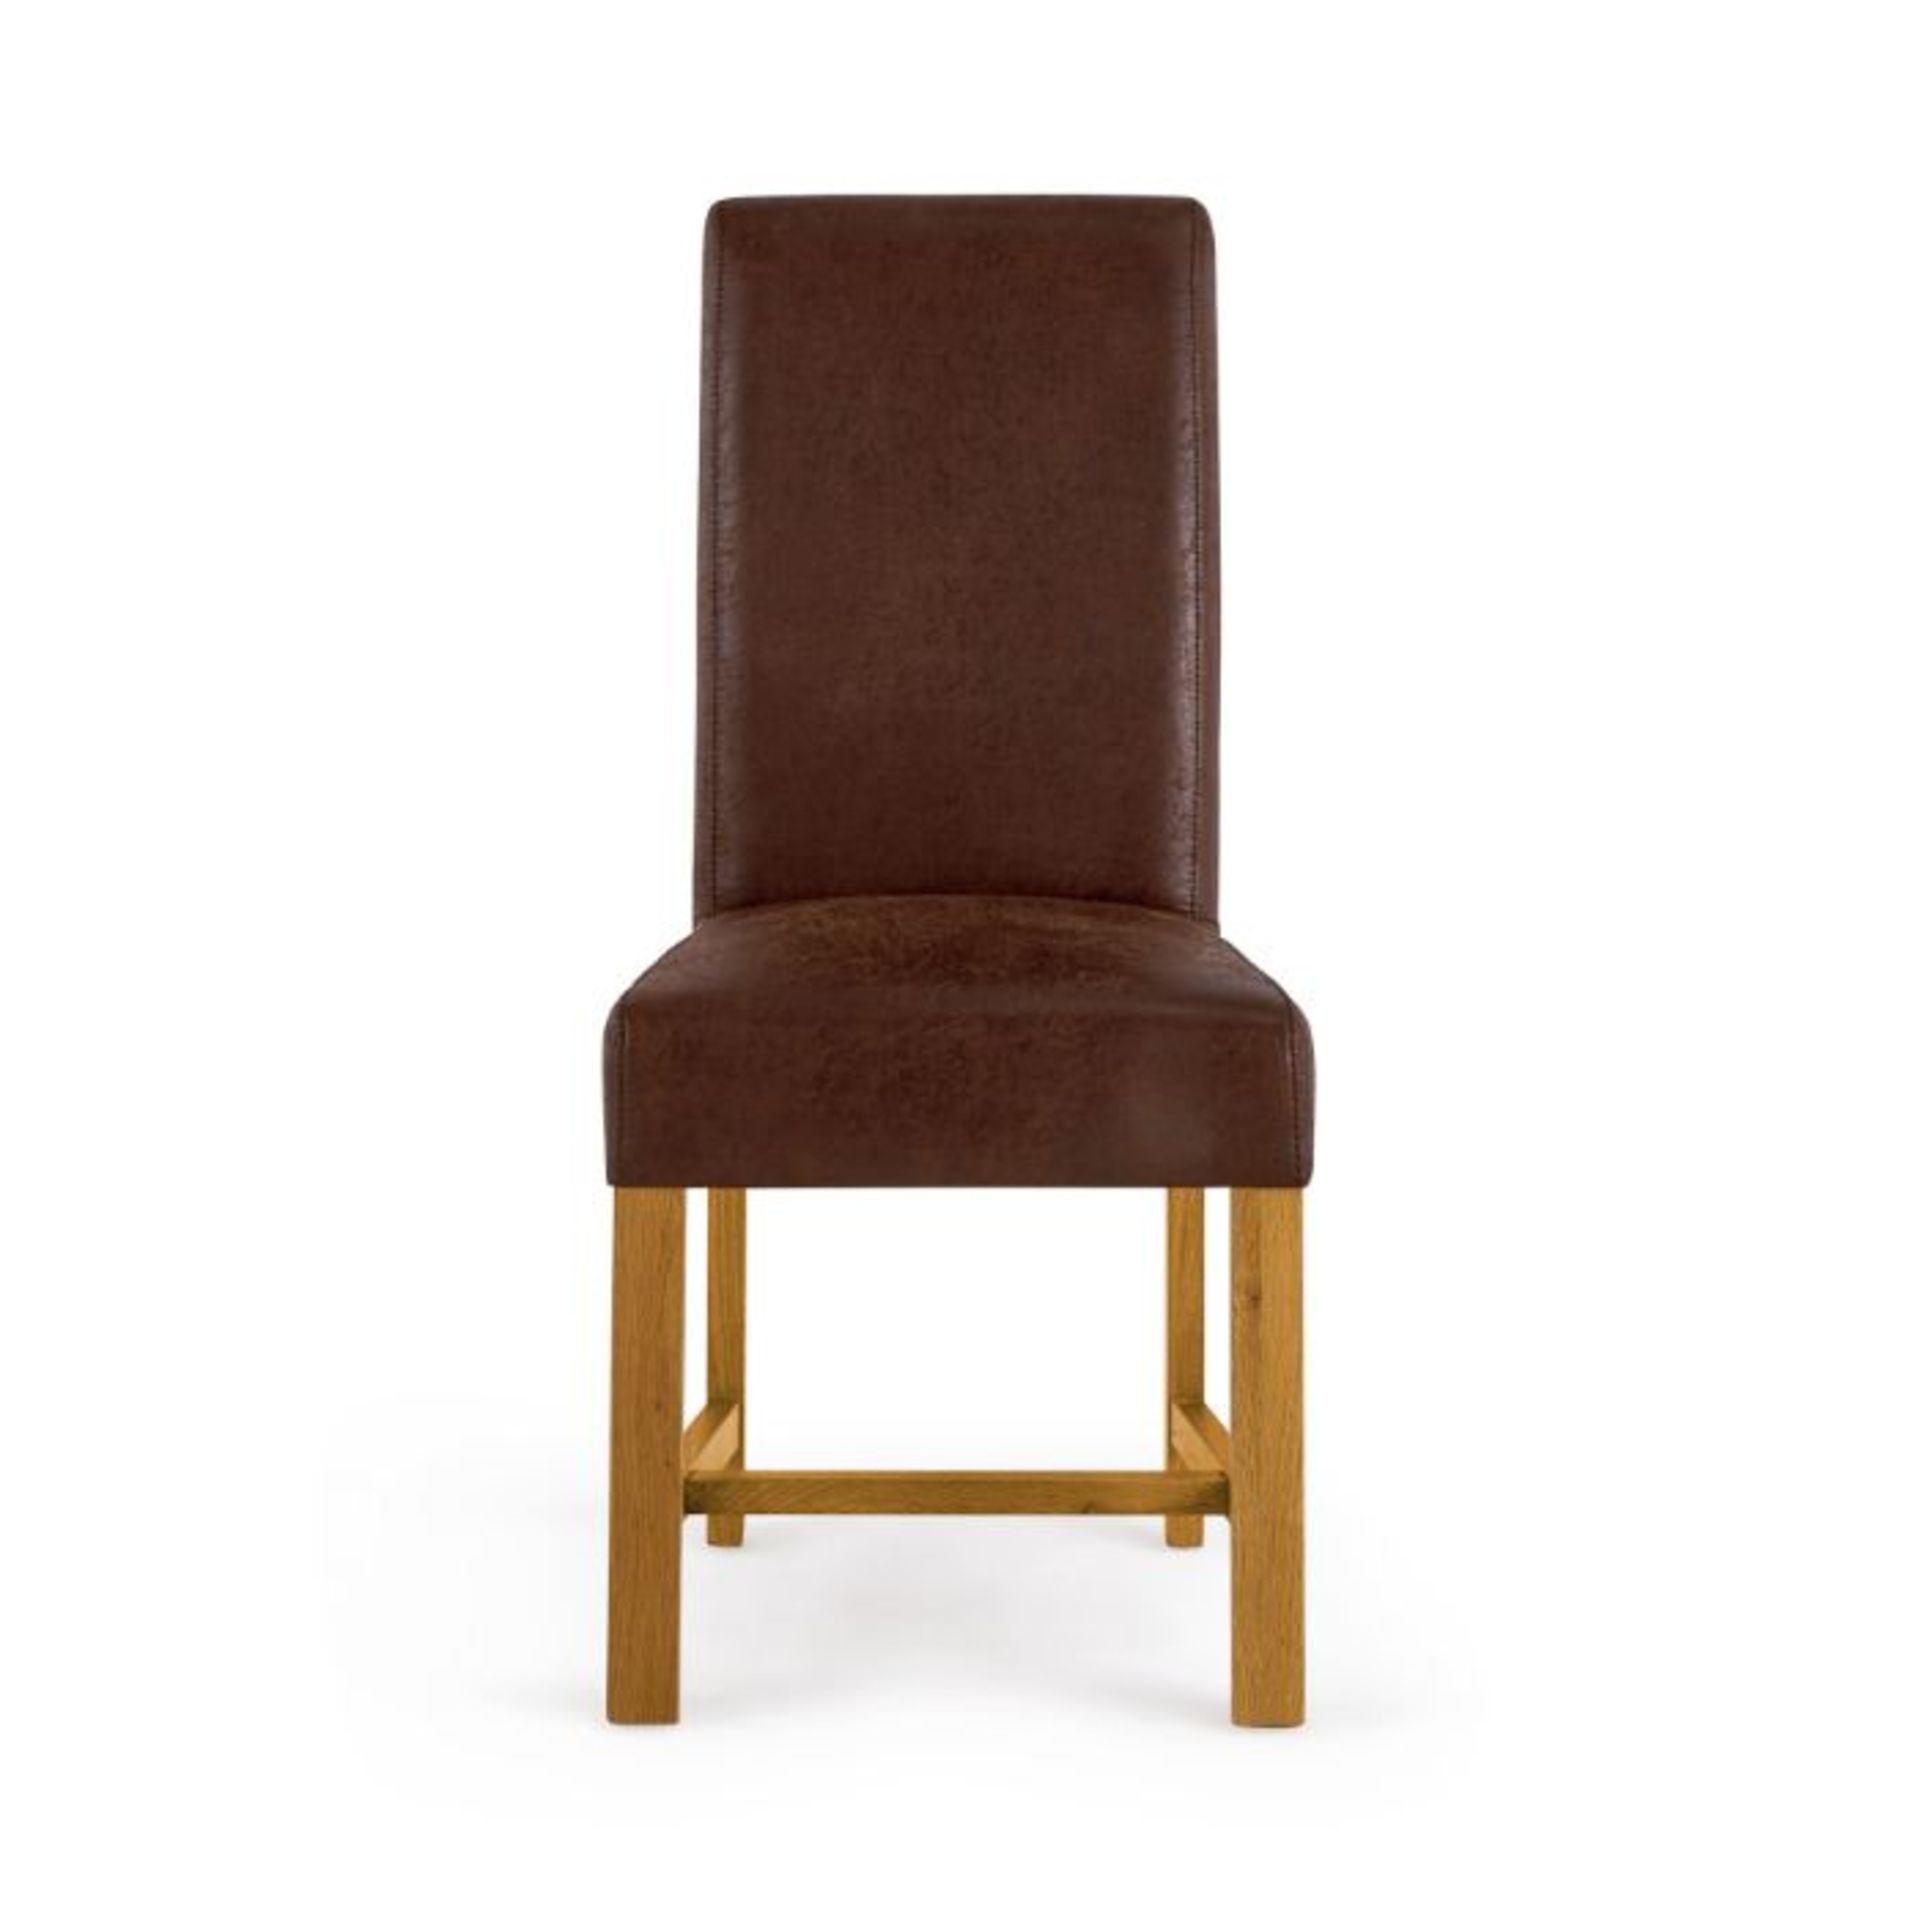 Oak Furnitureland Scroll Back Chair in Antiqued Brown Fabric with Solid Oak Legs RRP œ380.00 This